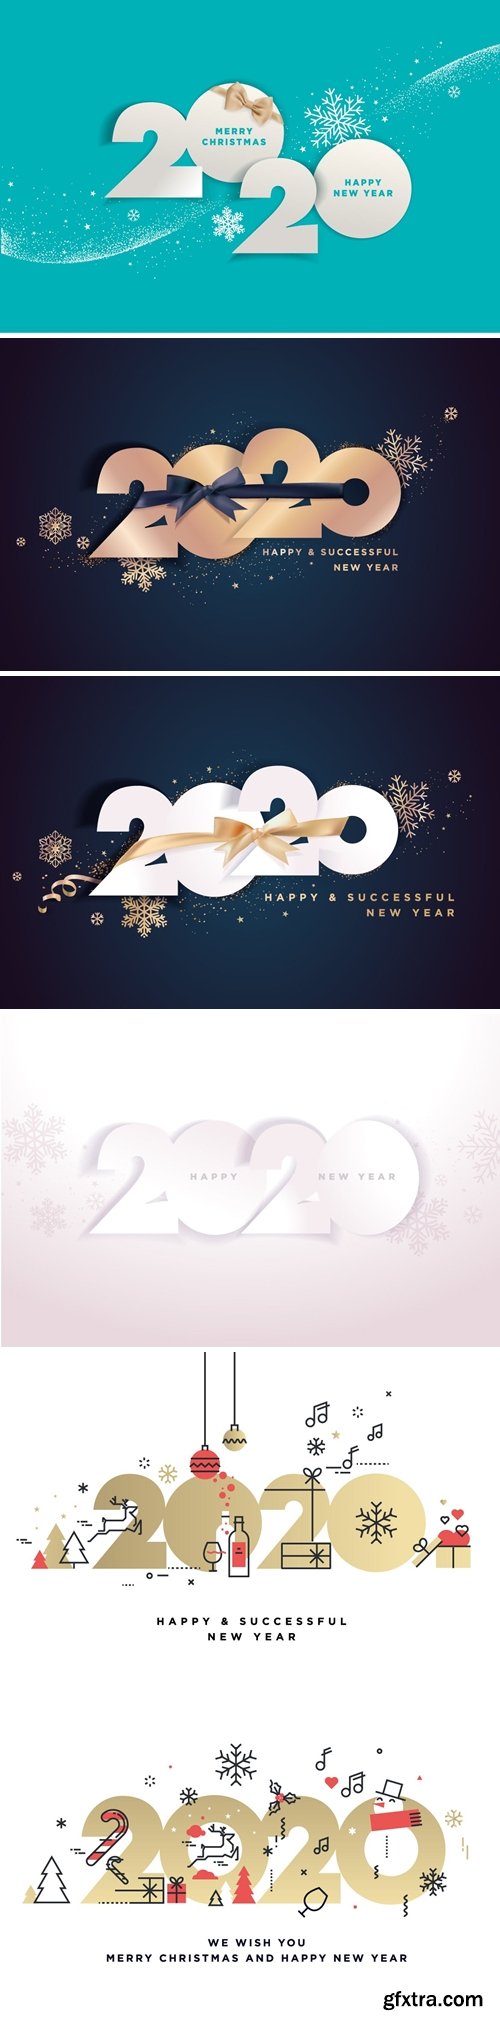 Happy New Year 2020 business greeting card